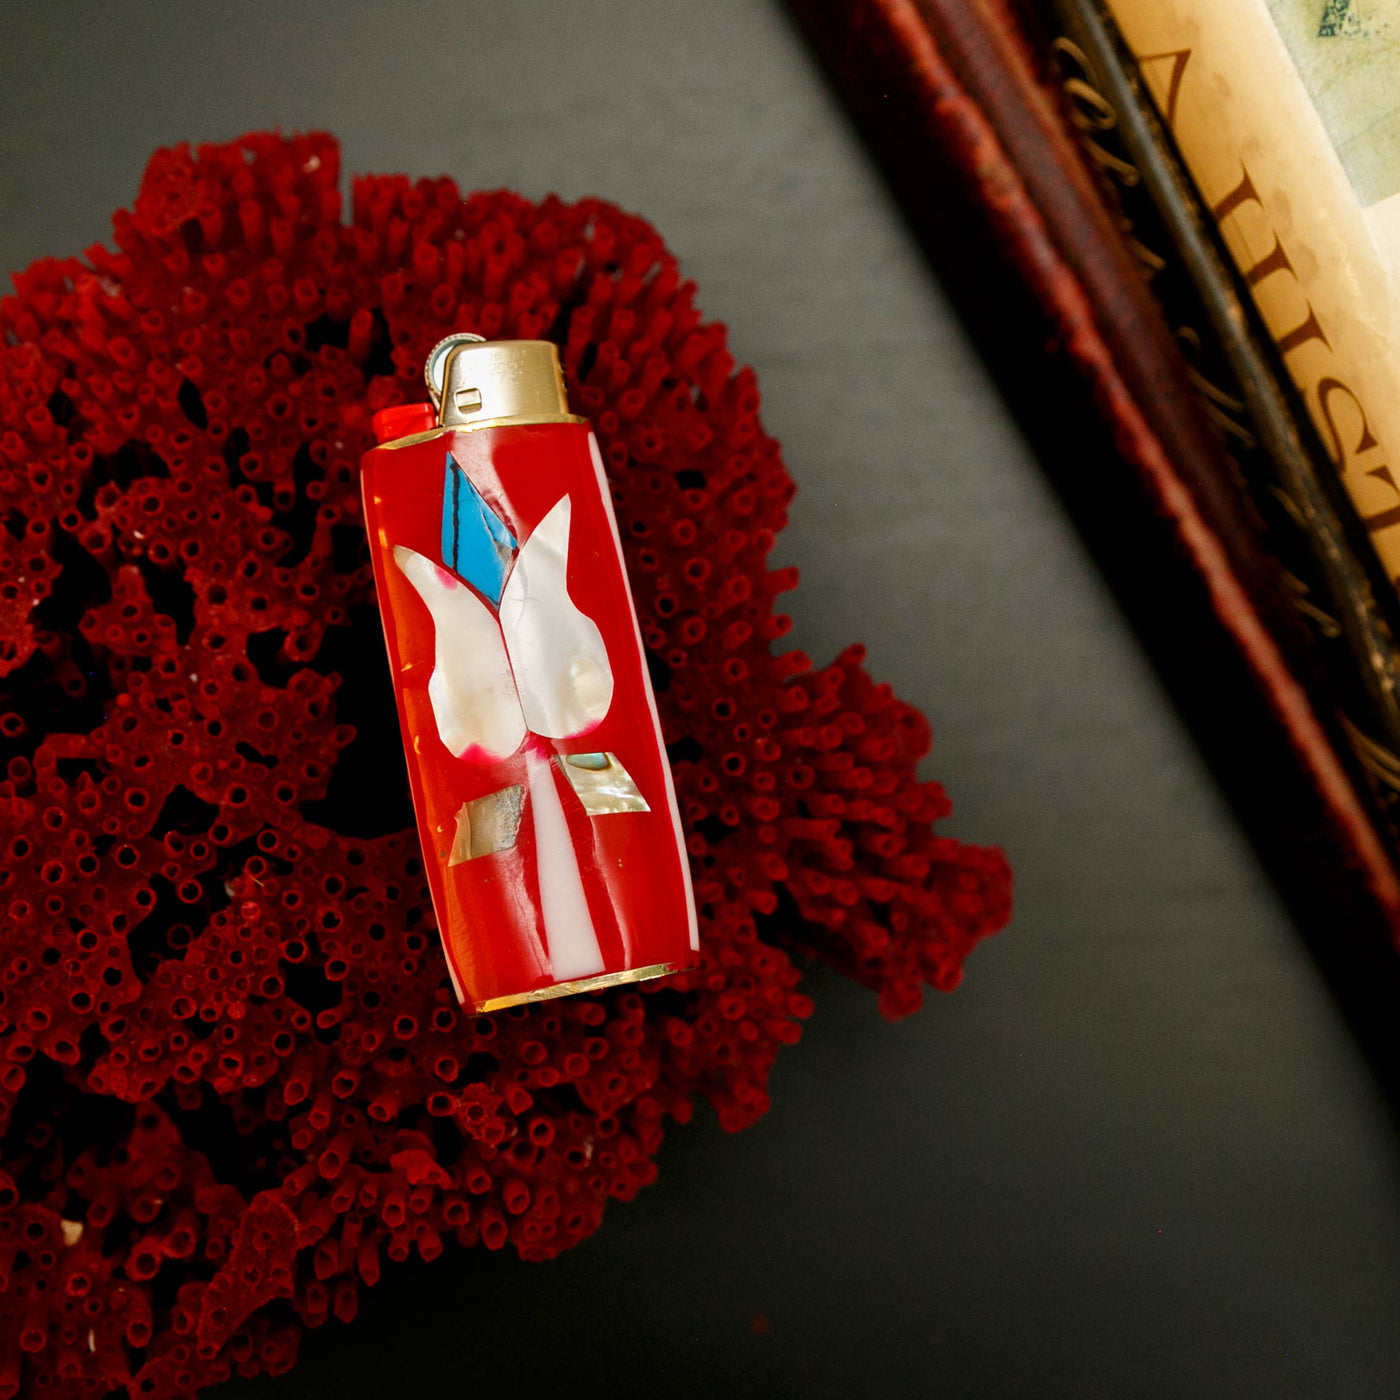 Dark Red Flower Vintage Lighter Case from the Saint Claude Social Club Vintage Collection and home goods section.